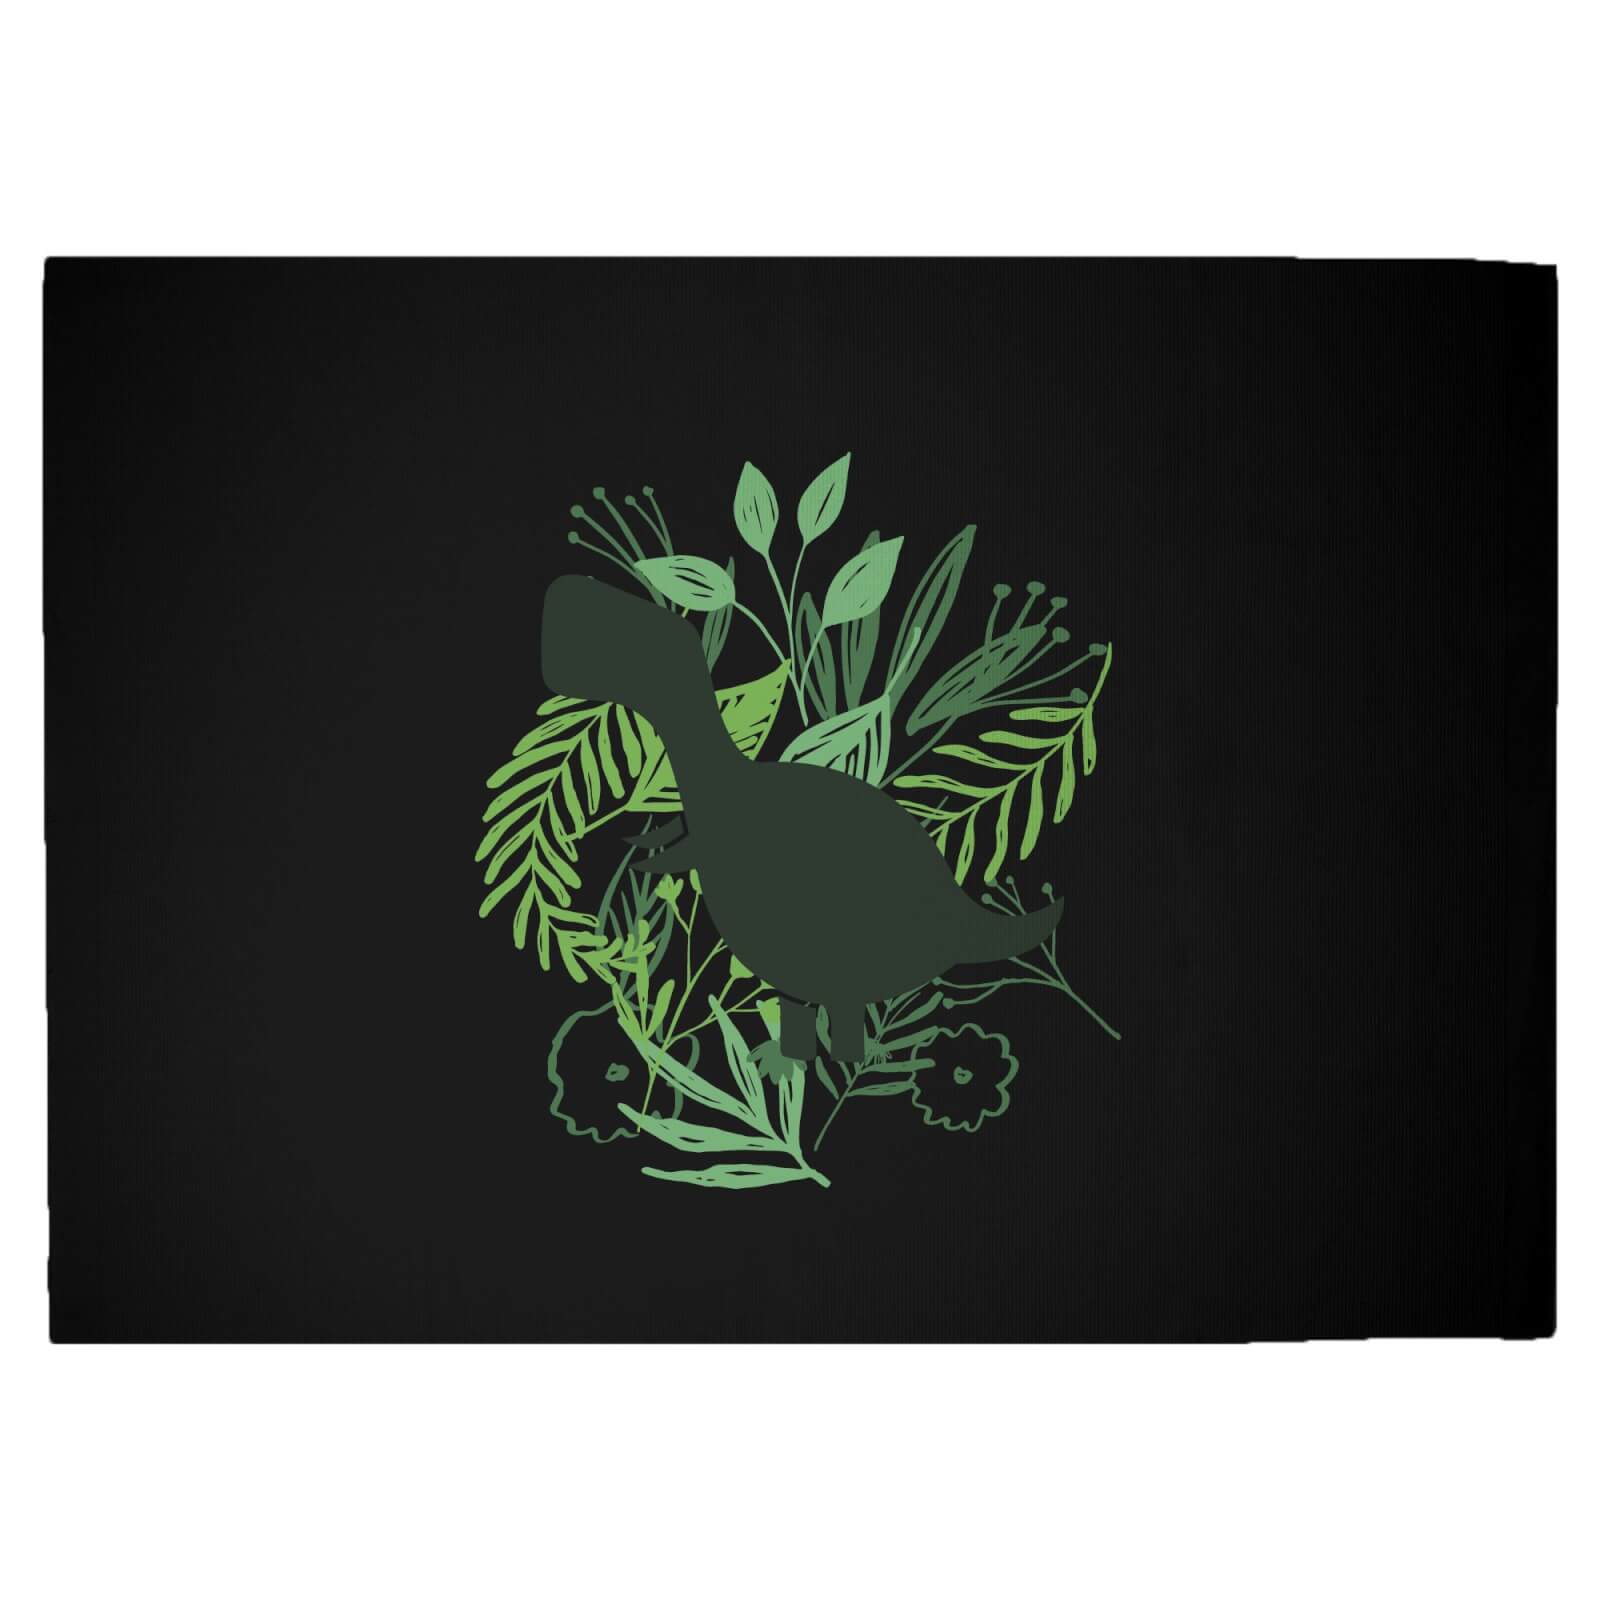 T-Rex Silhouette Foliage Woven Rug - Large